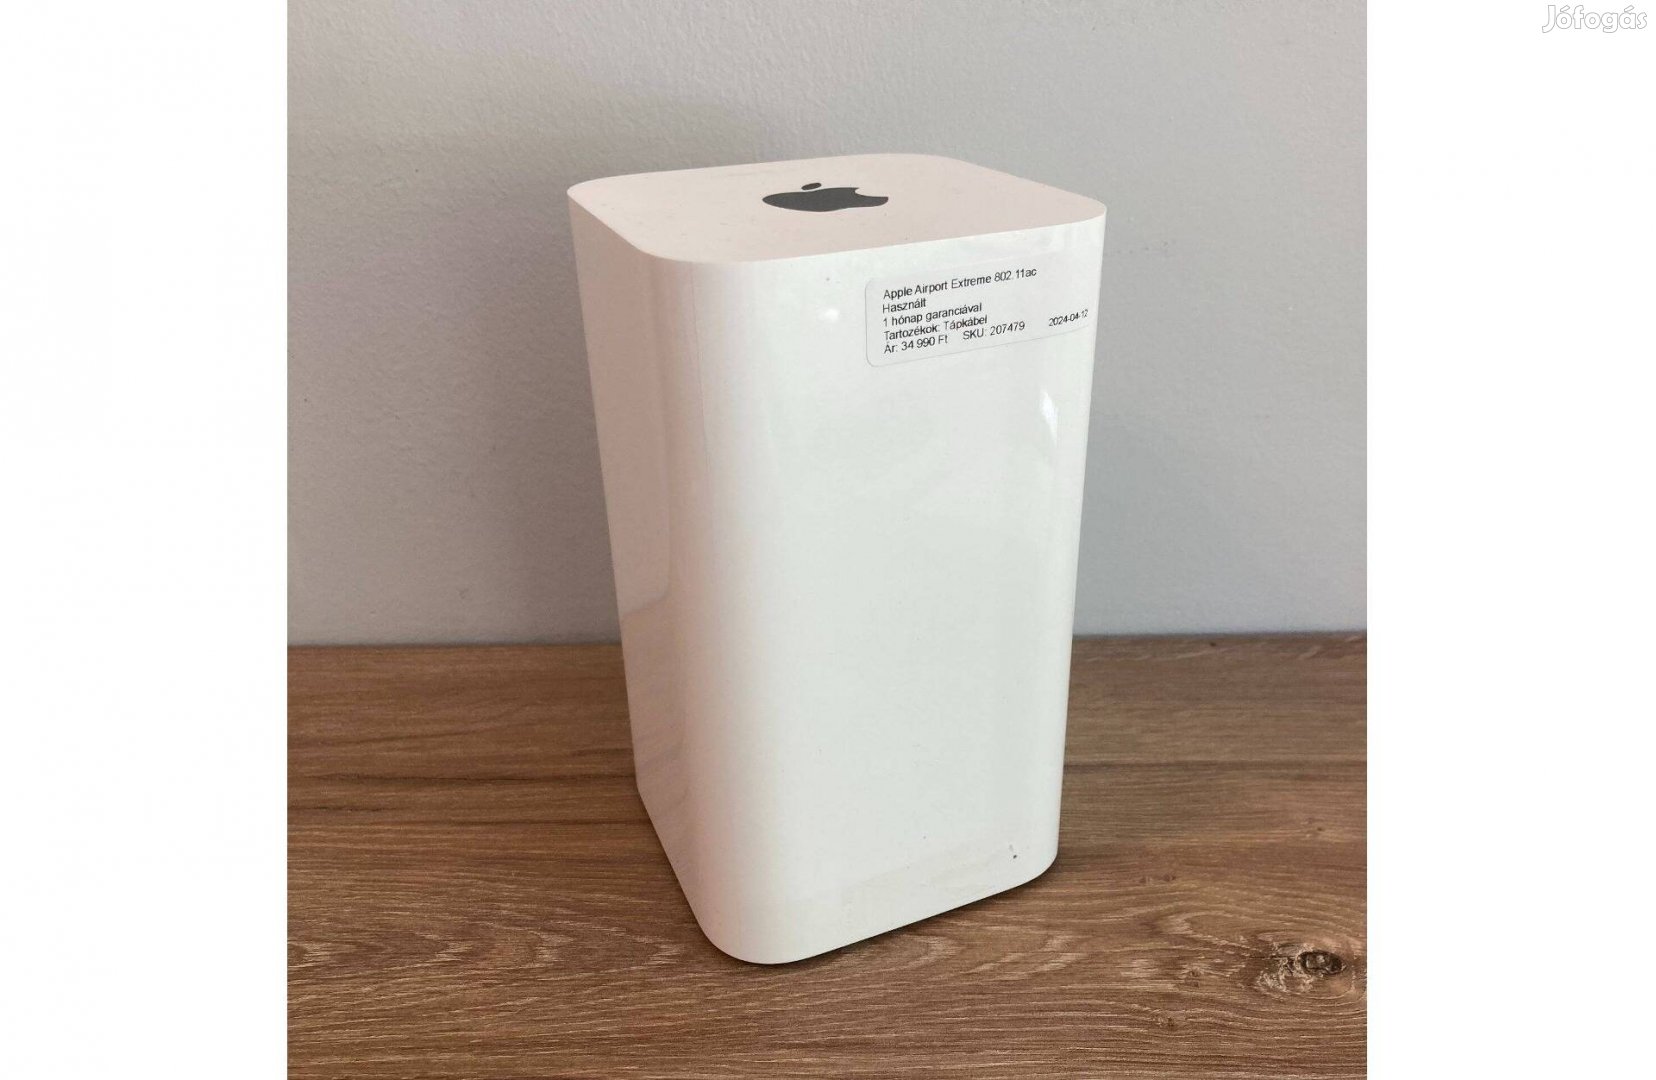 Apple Airport Extreme 802.11ac Wifi Router